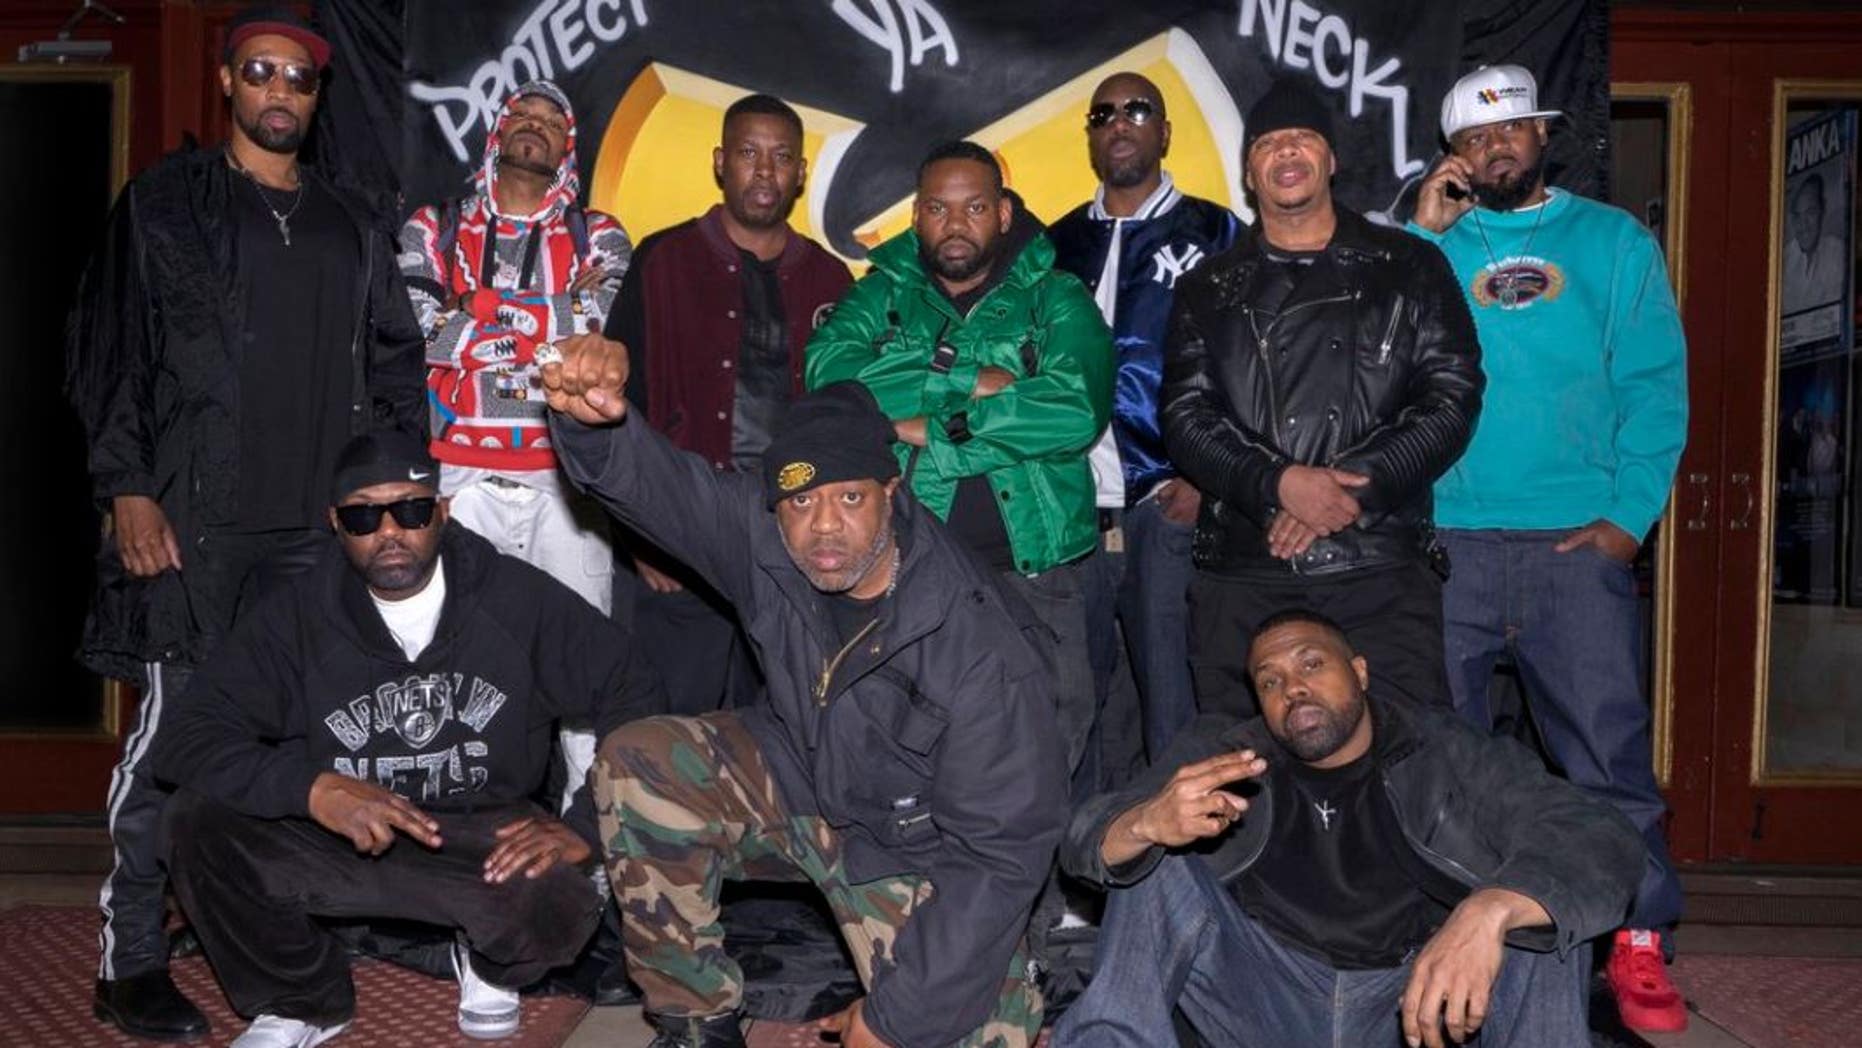 WuTang Clan show at Ryman Auditorium will bring hiphop to country music shrine Fox News